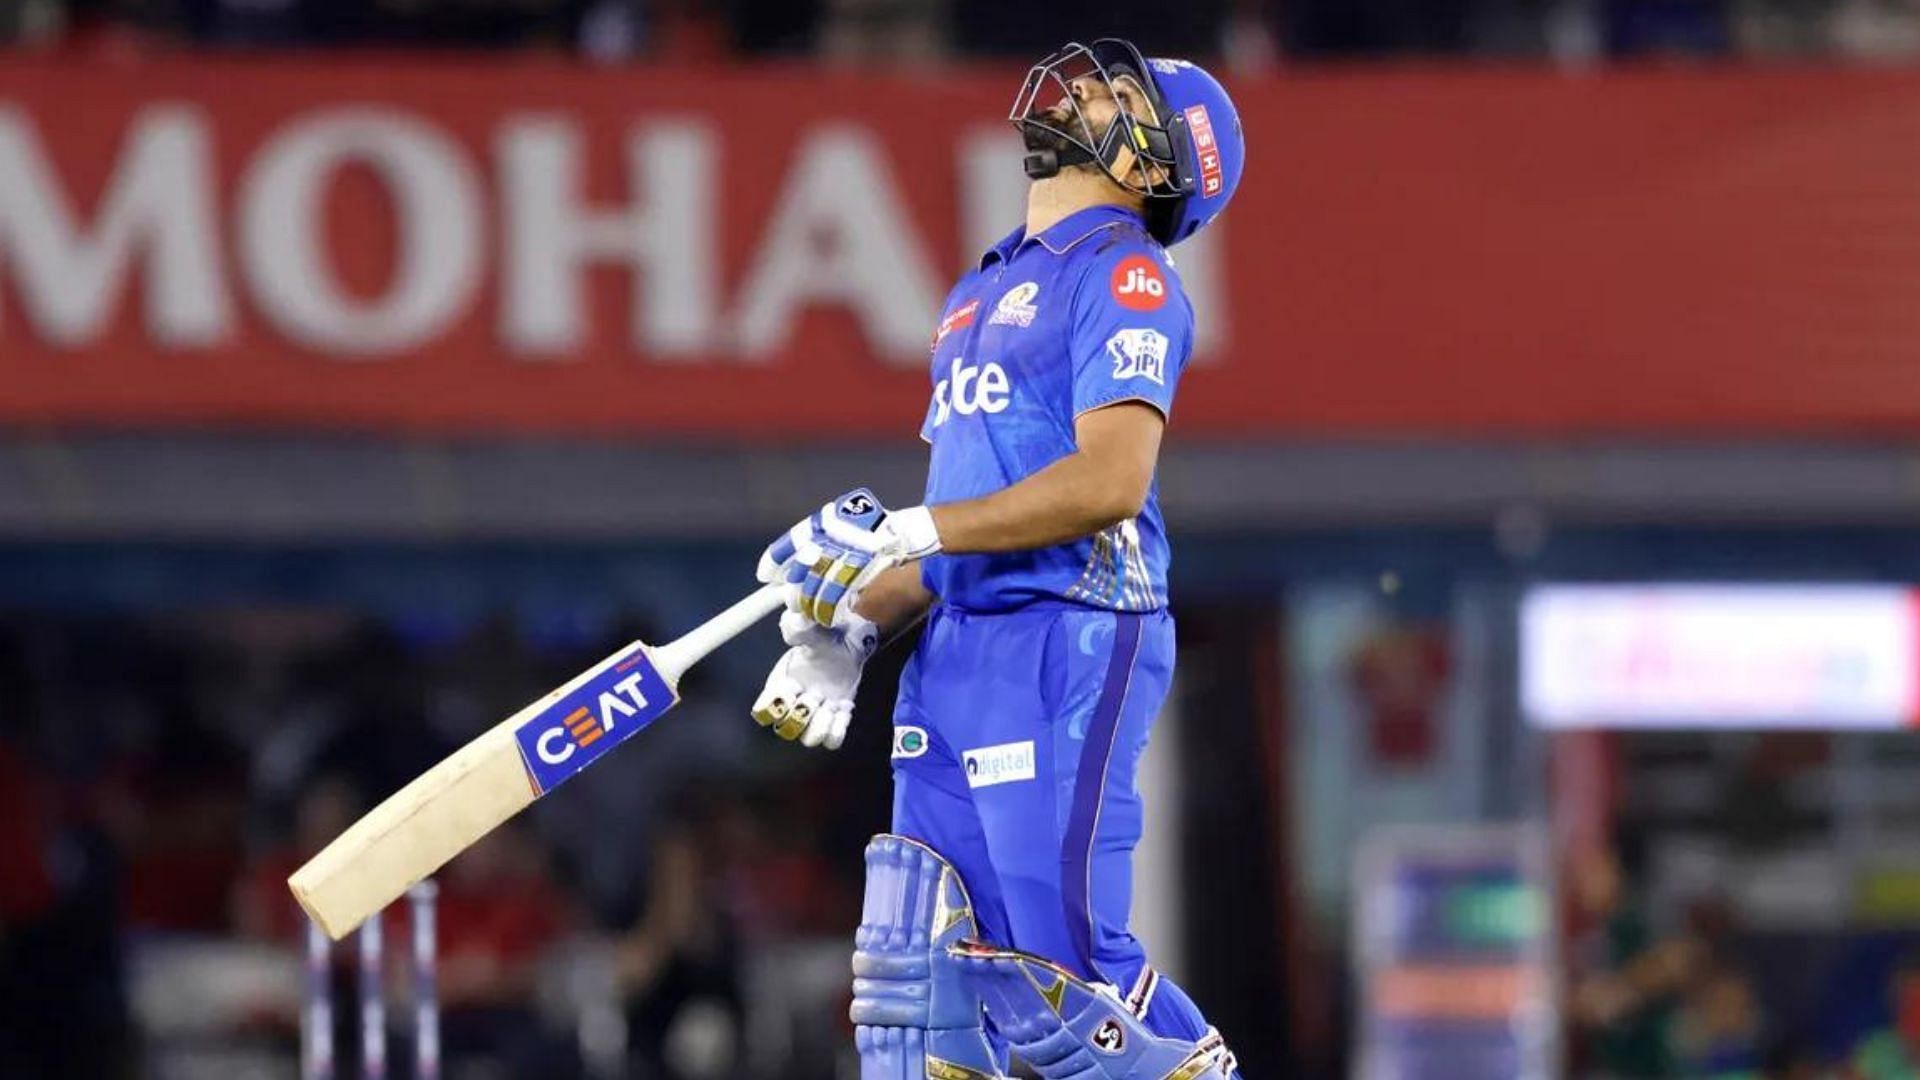 A disappointed Rohit Sharma walks off after being dismissed for a duck against the Punjab Kings (P.C.:iplt20.com)